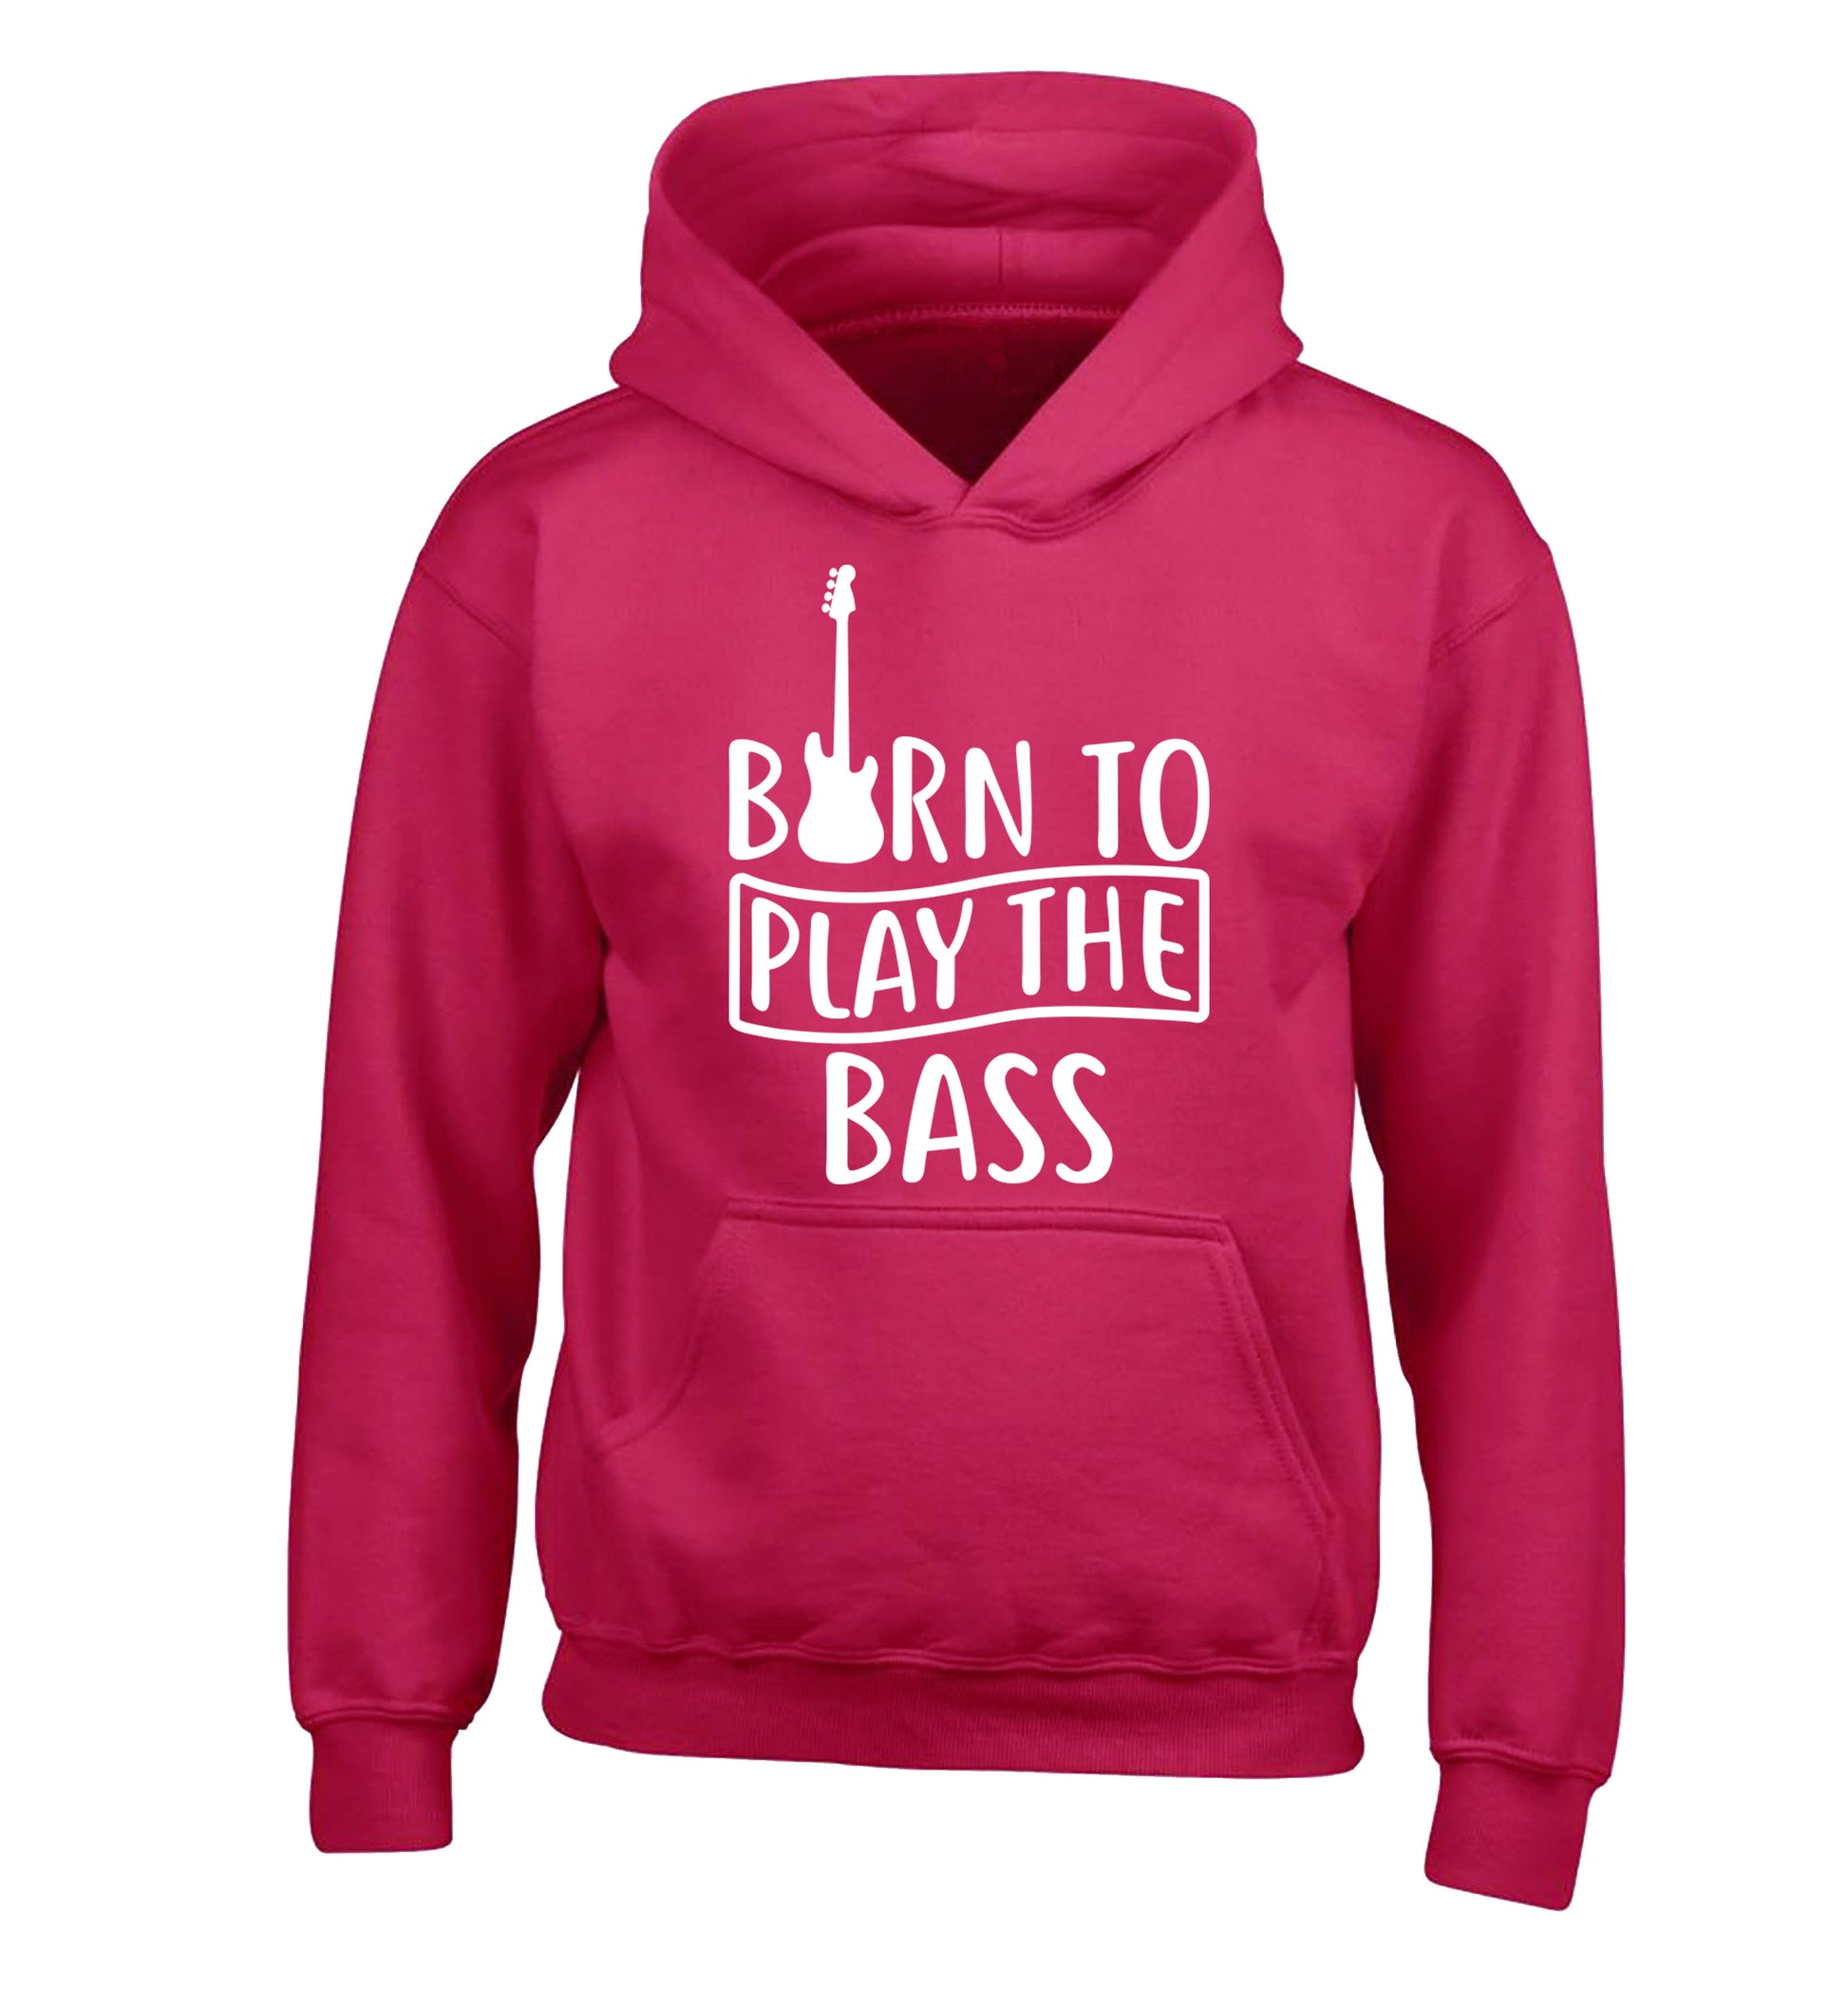 Born to play the bass children's pink hoodie 12-14 Years